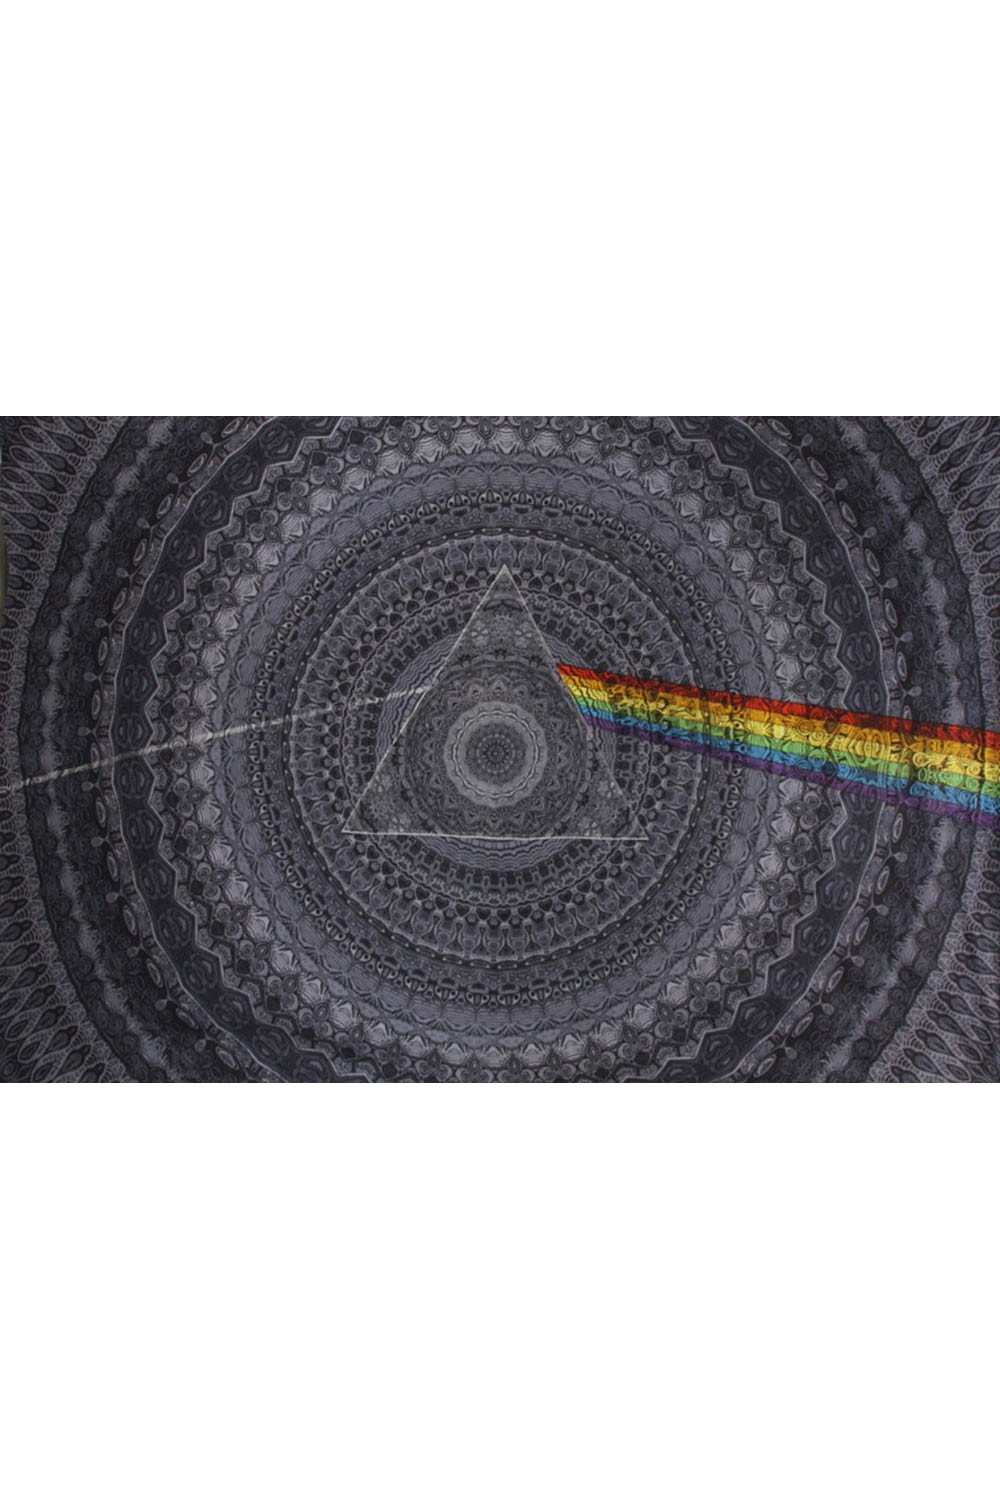 3D Pink Floyd The Dark Side of the Moon Shadow Black Tapestry 60x90 - Art by Chris Pinkerton